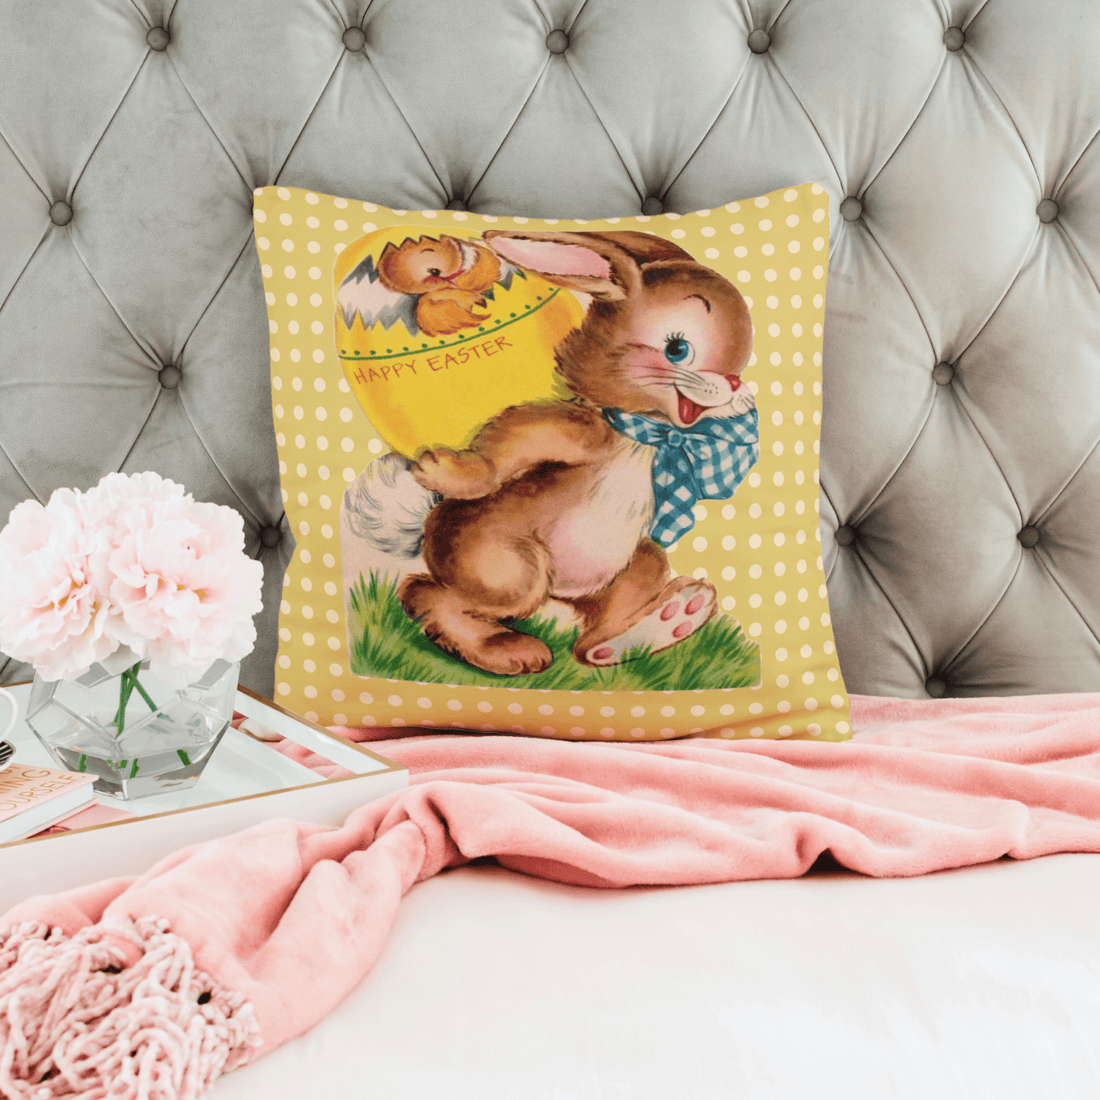 Vintage Easter Card Anthropomorphic Bunny, Happy Easter, Yellow Polka Dot, Hatching Chick In Egg, Spring, Easter, Retro Pillow And Insert Home Decor